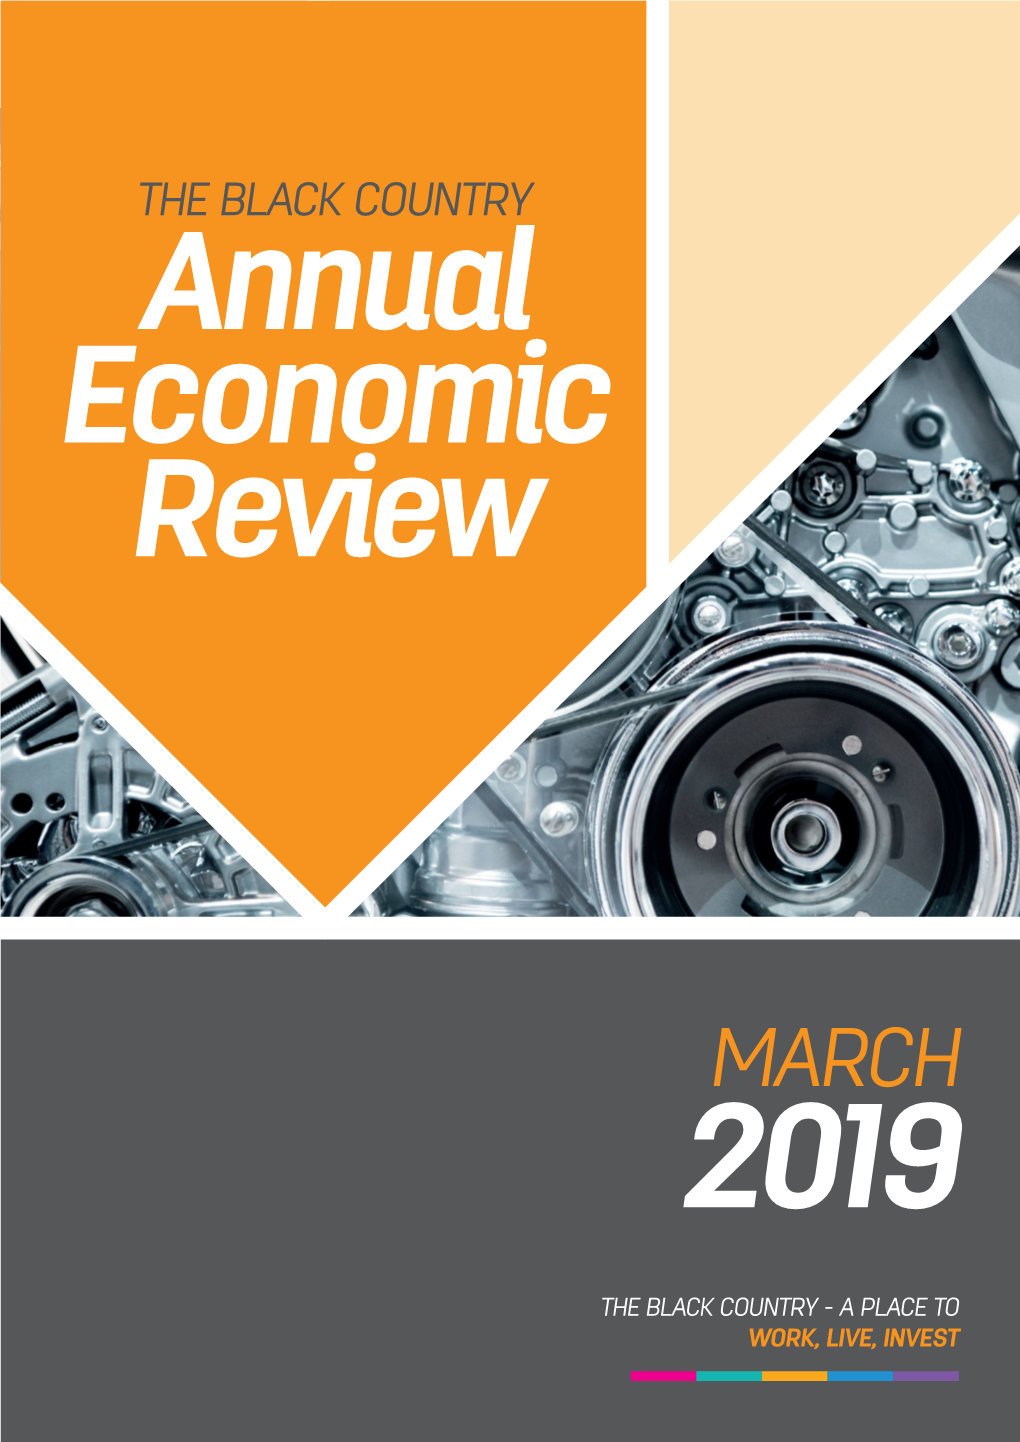 The Black Country Annual Economic Review 2019